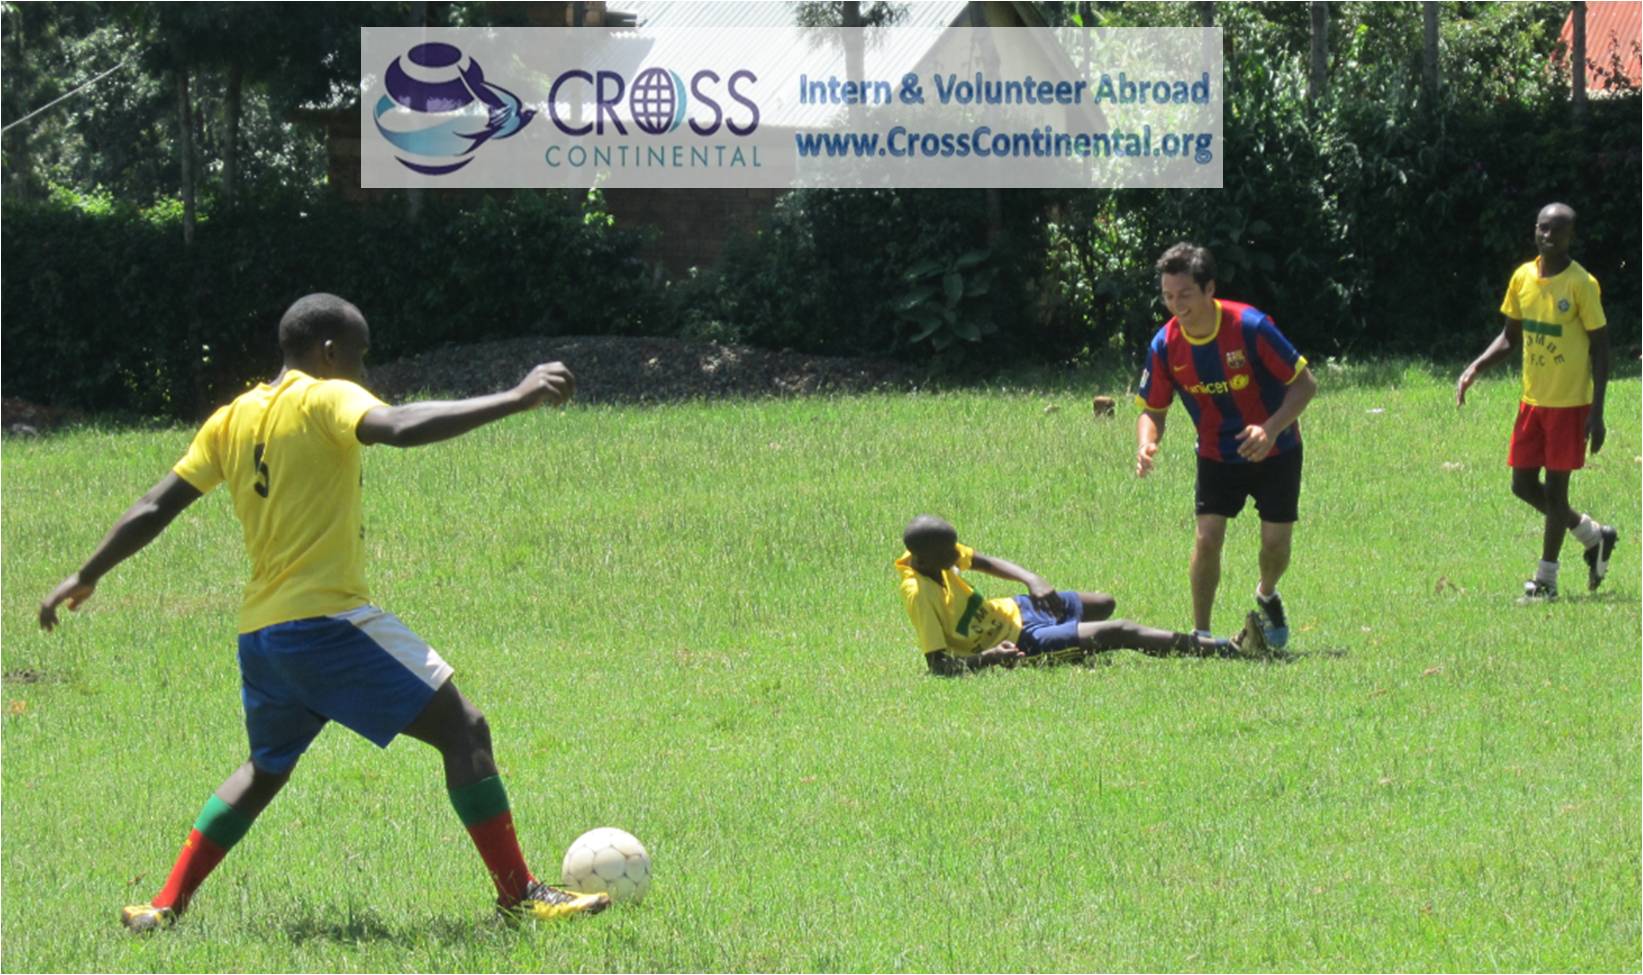 Volunteer Abroad in Sports Education and Soccer Development